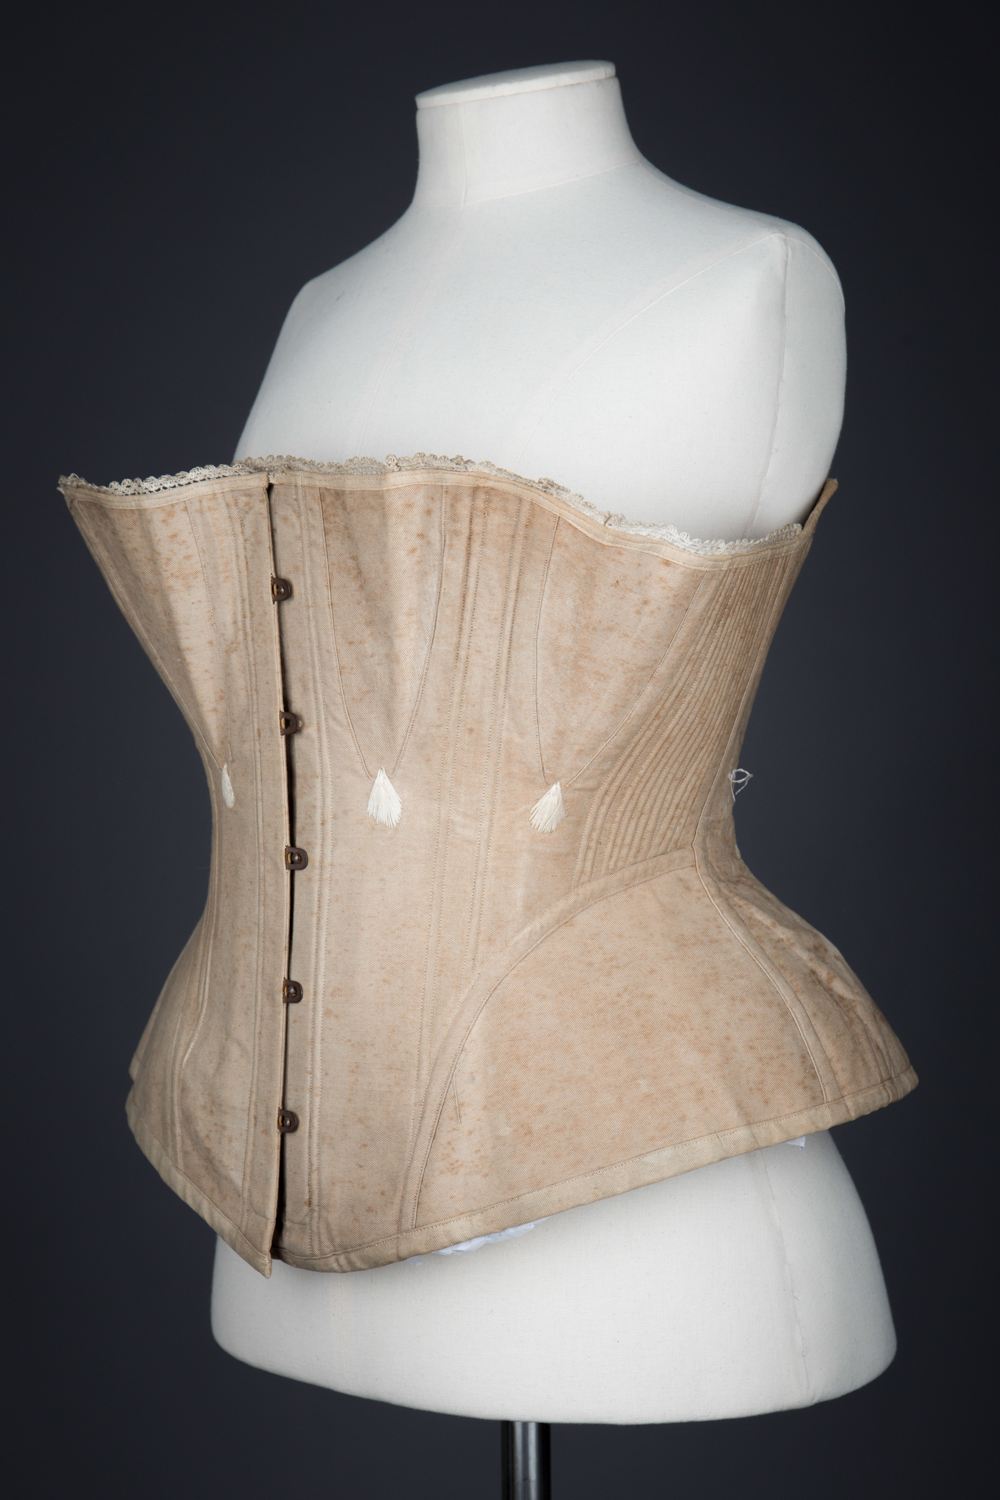 Ecru Cotton Twill Corset With Gores & White Flossing Embroidery, c. 1870s, Great Britain. The Underpinnings Museum. Photography by Tigz Rice.